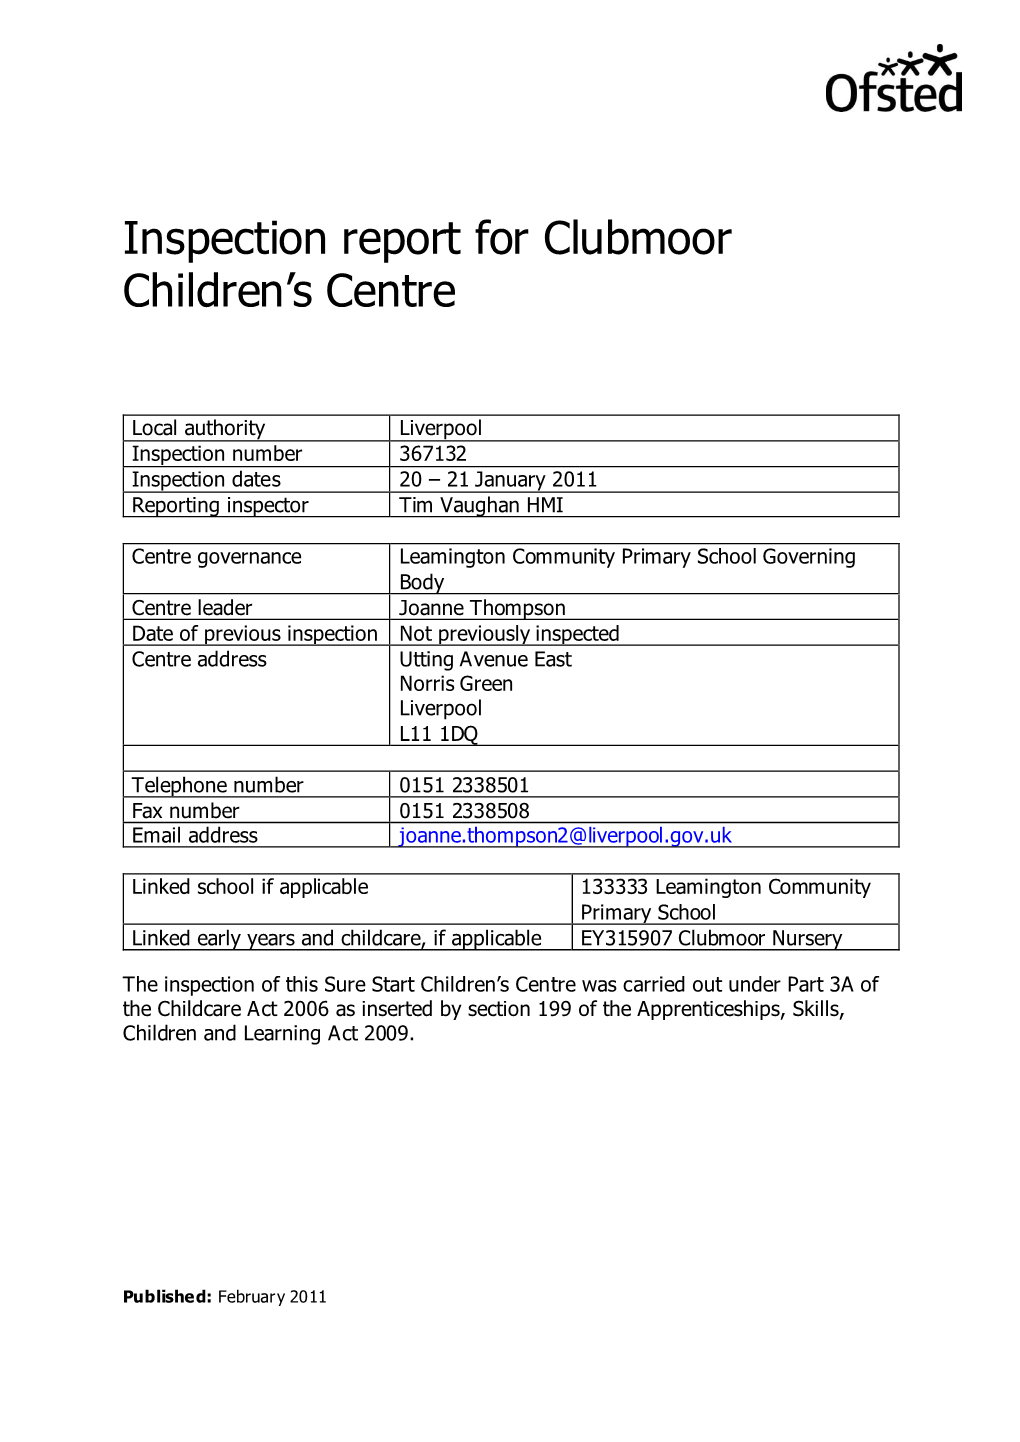 Inspection Report for Clubmoor Children's Centre